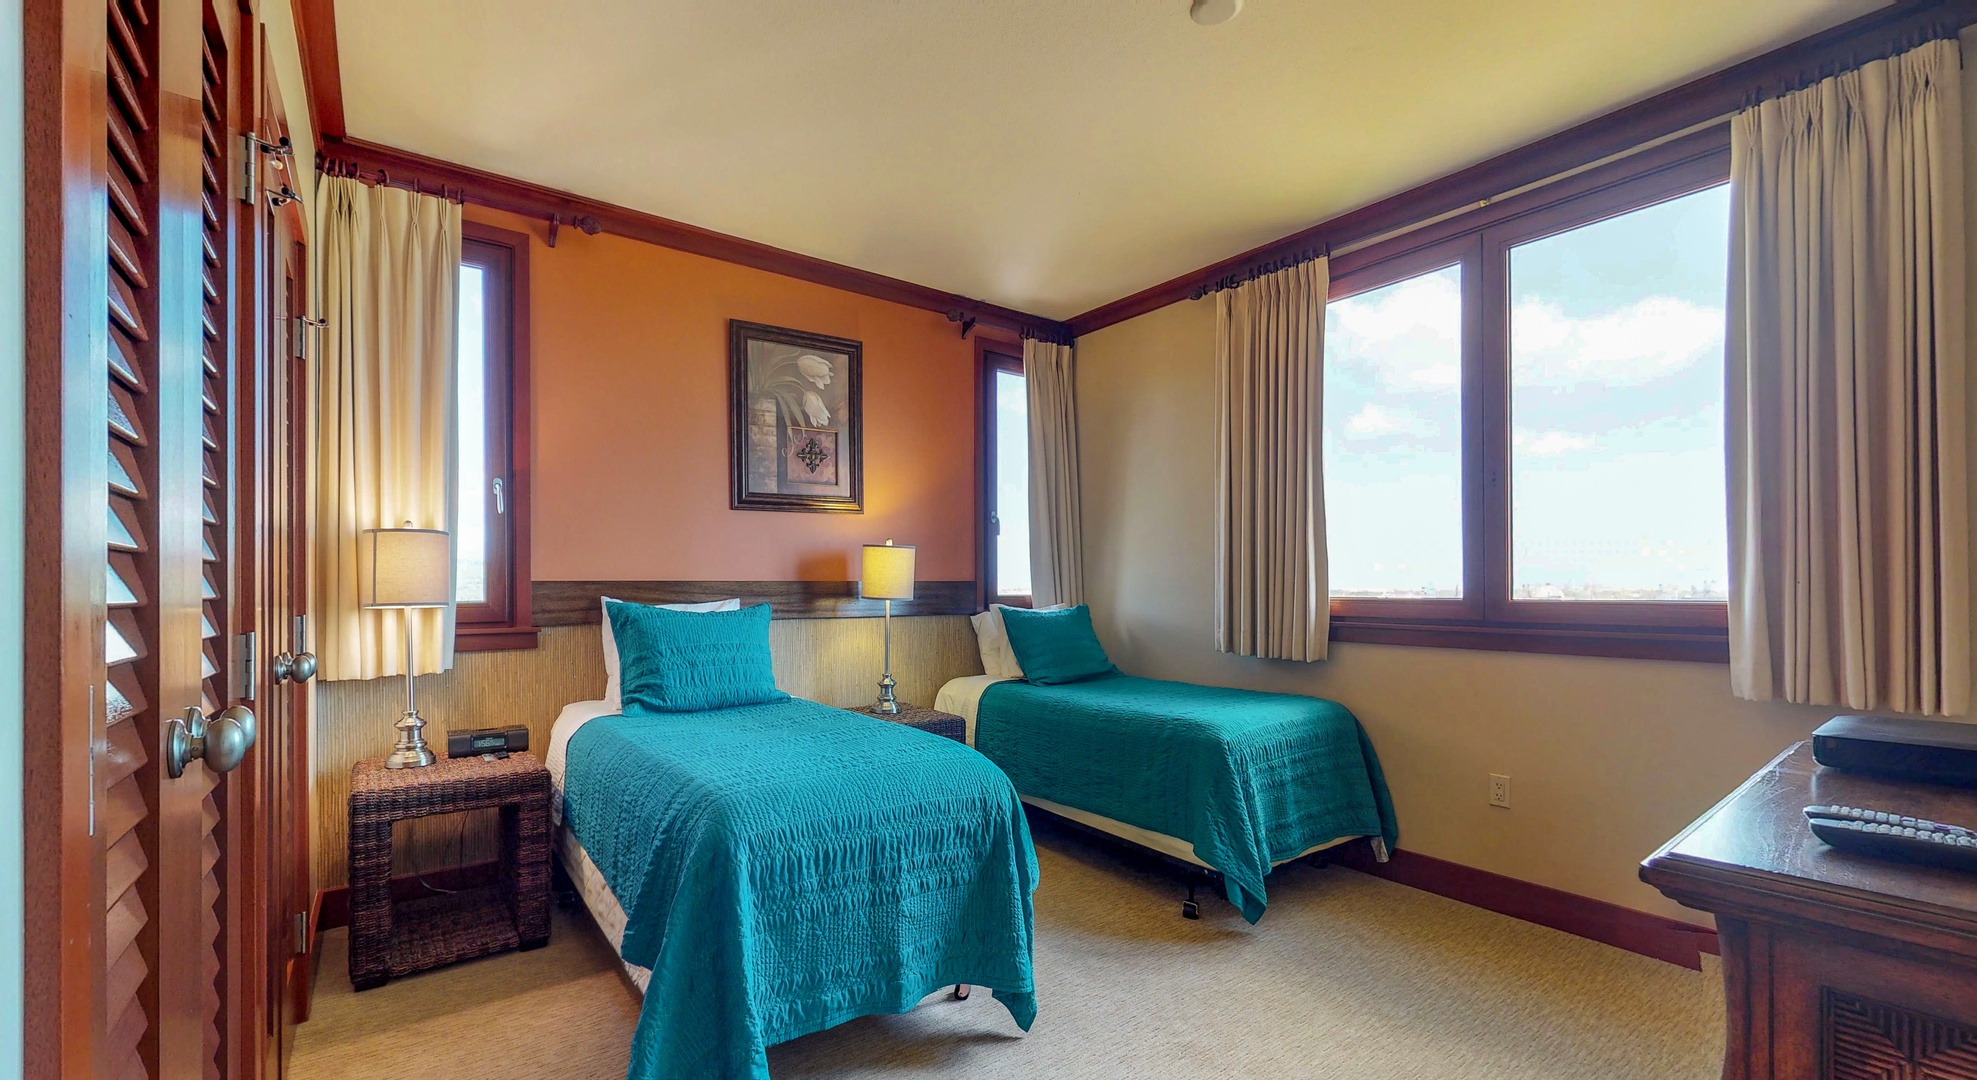 Kapolei Vacation Rentals, Ko Olina Beach Villas O822 - The third bedroom has extra long twin beds for a restful stay.